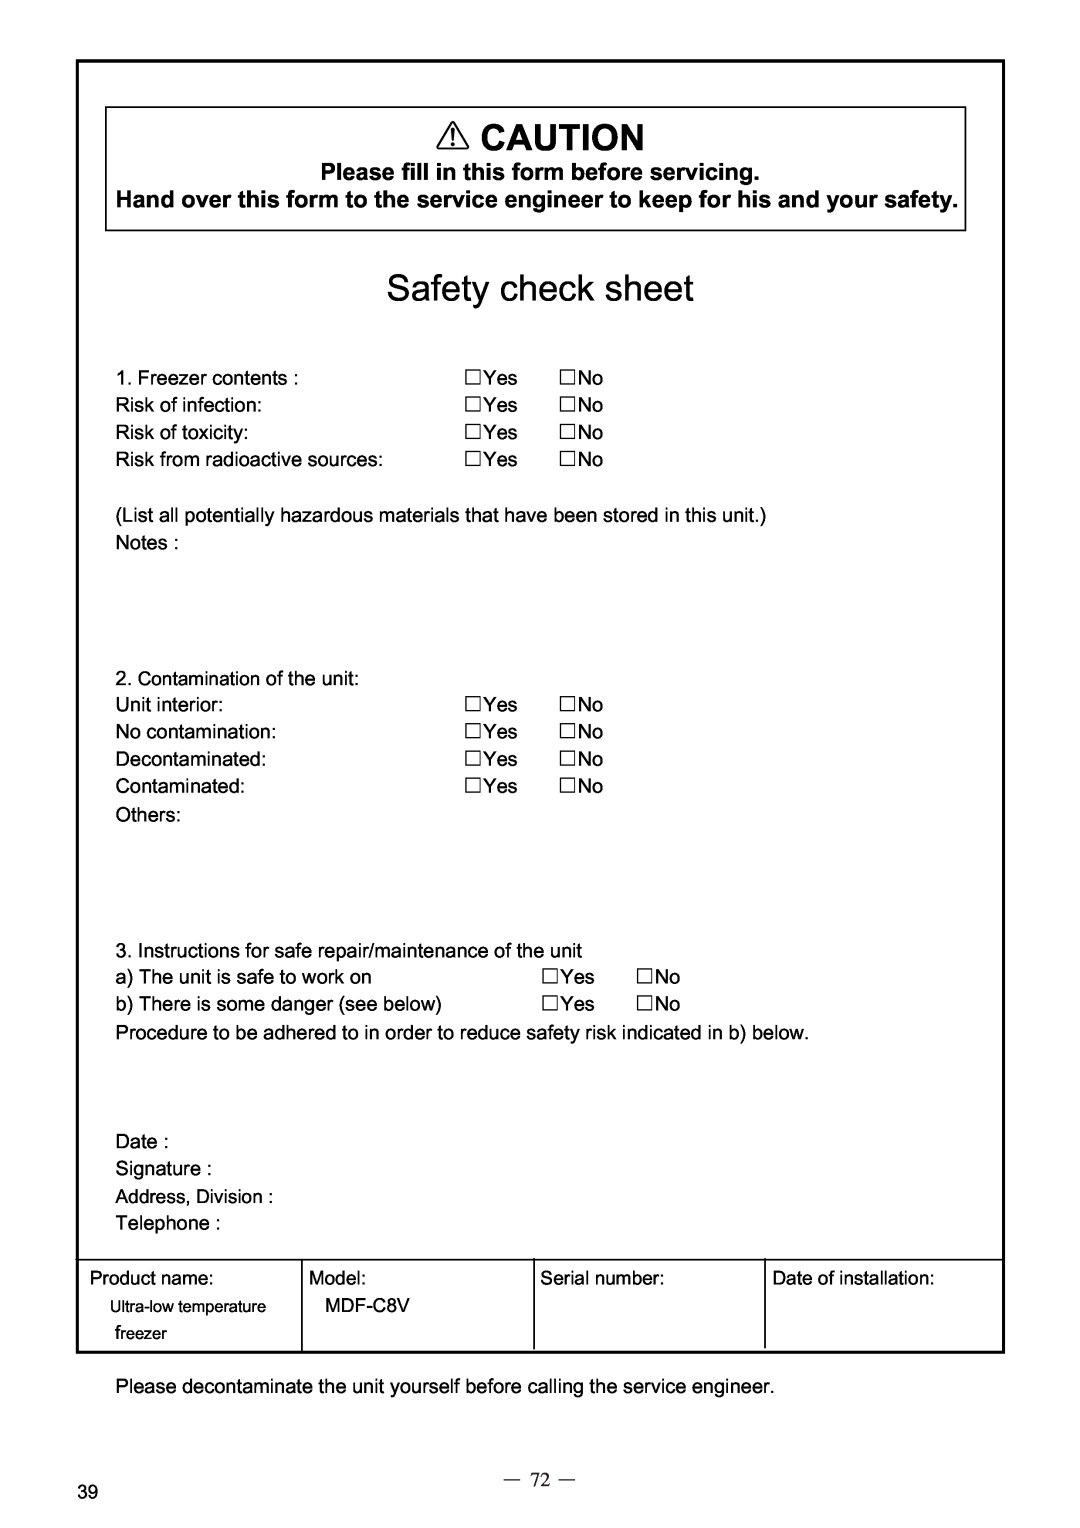 Sanyo MDF-C8V service manual Safety check sheet, Please fill in this form before servicing 